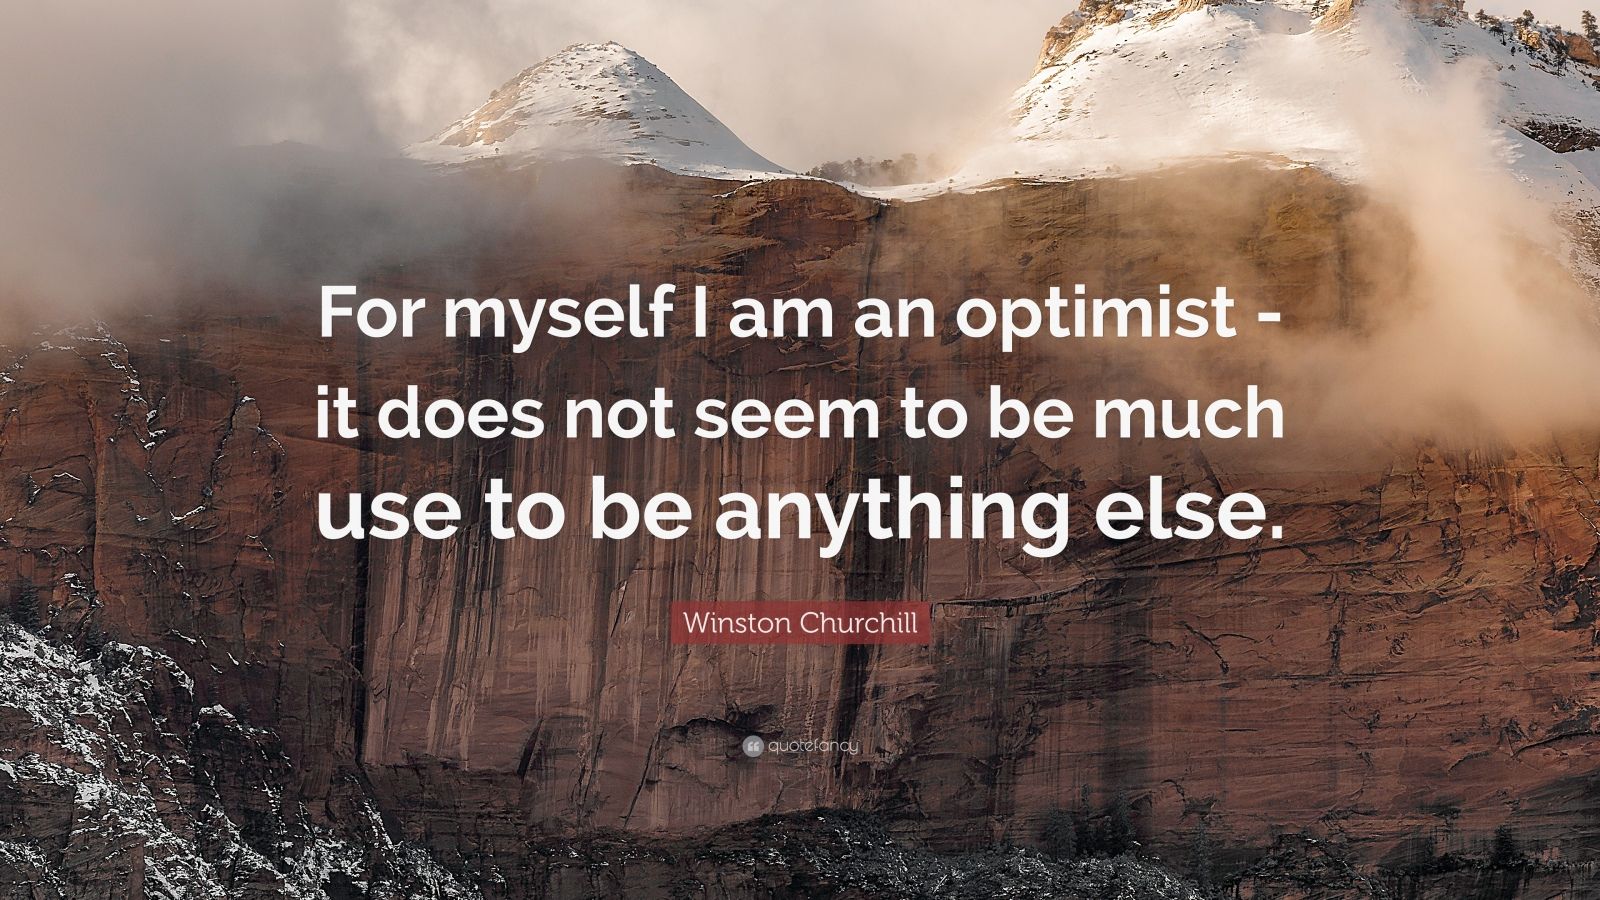 Winston Churchill Quote: “For myself I am an optimist - it does not ...